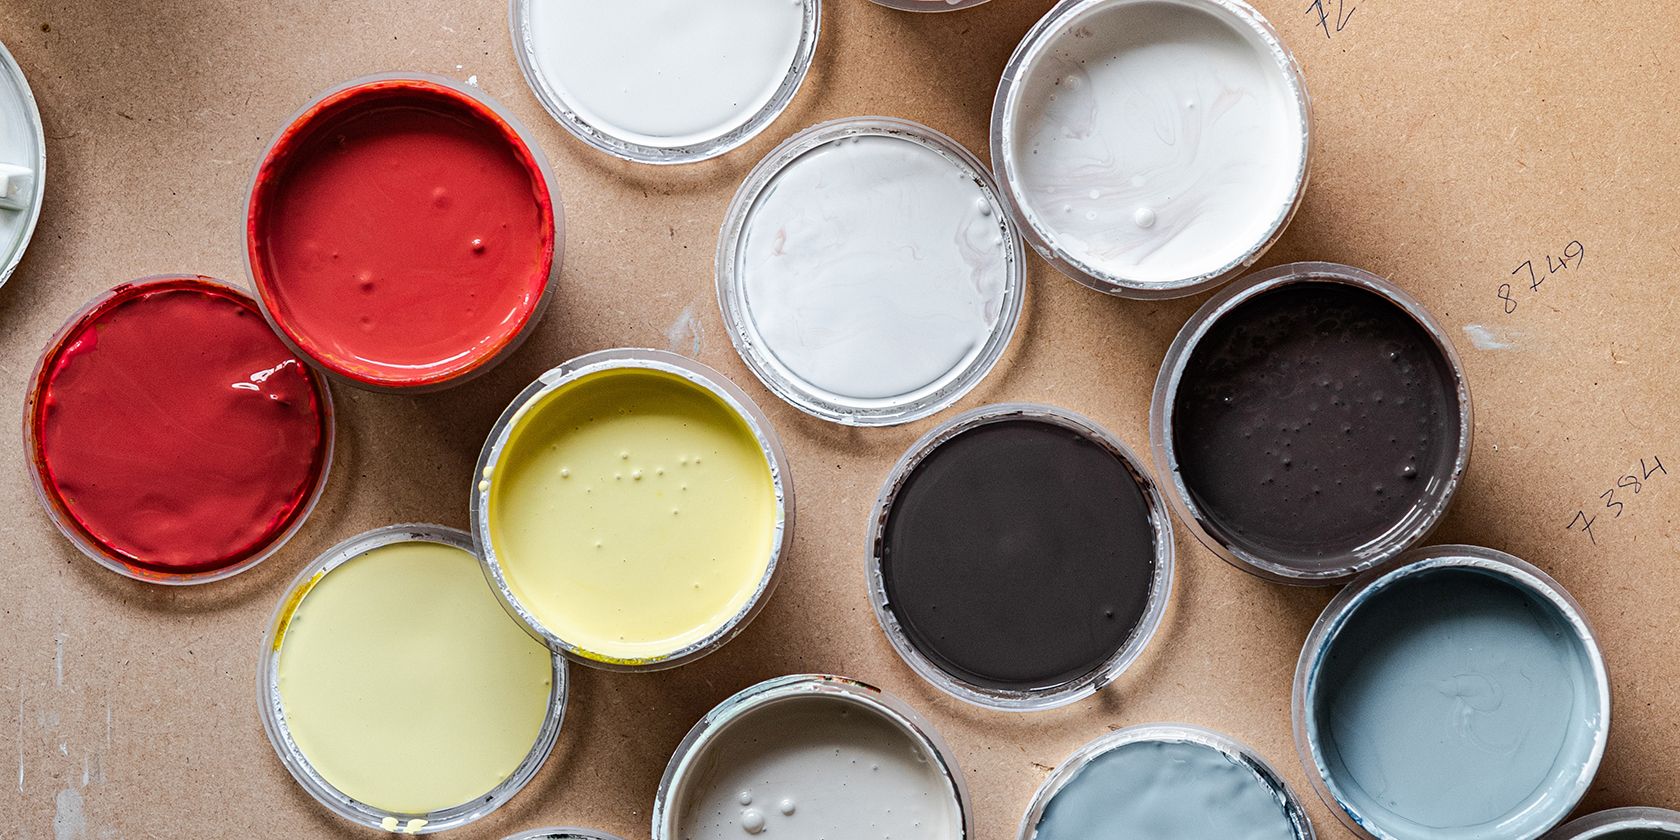 Bird's eye view of open paint cans with their lids next to them, showing different color paint from red, pastel yellow, and shades of gray.